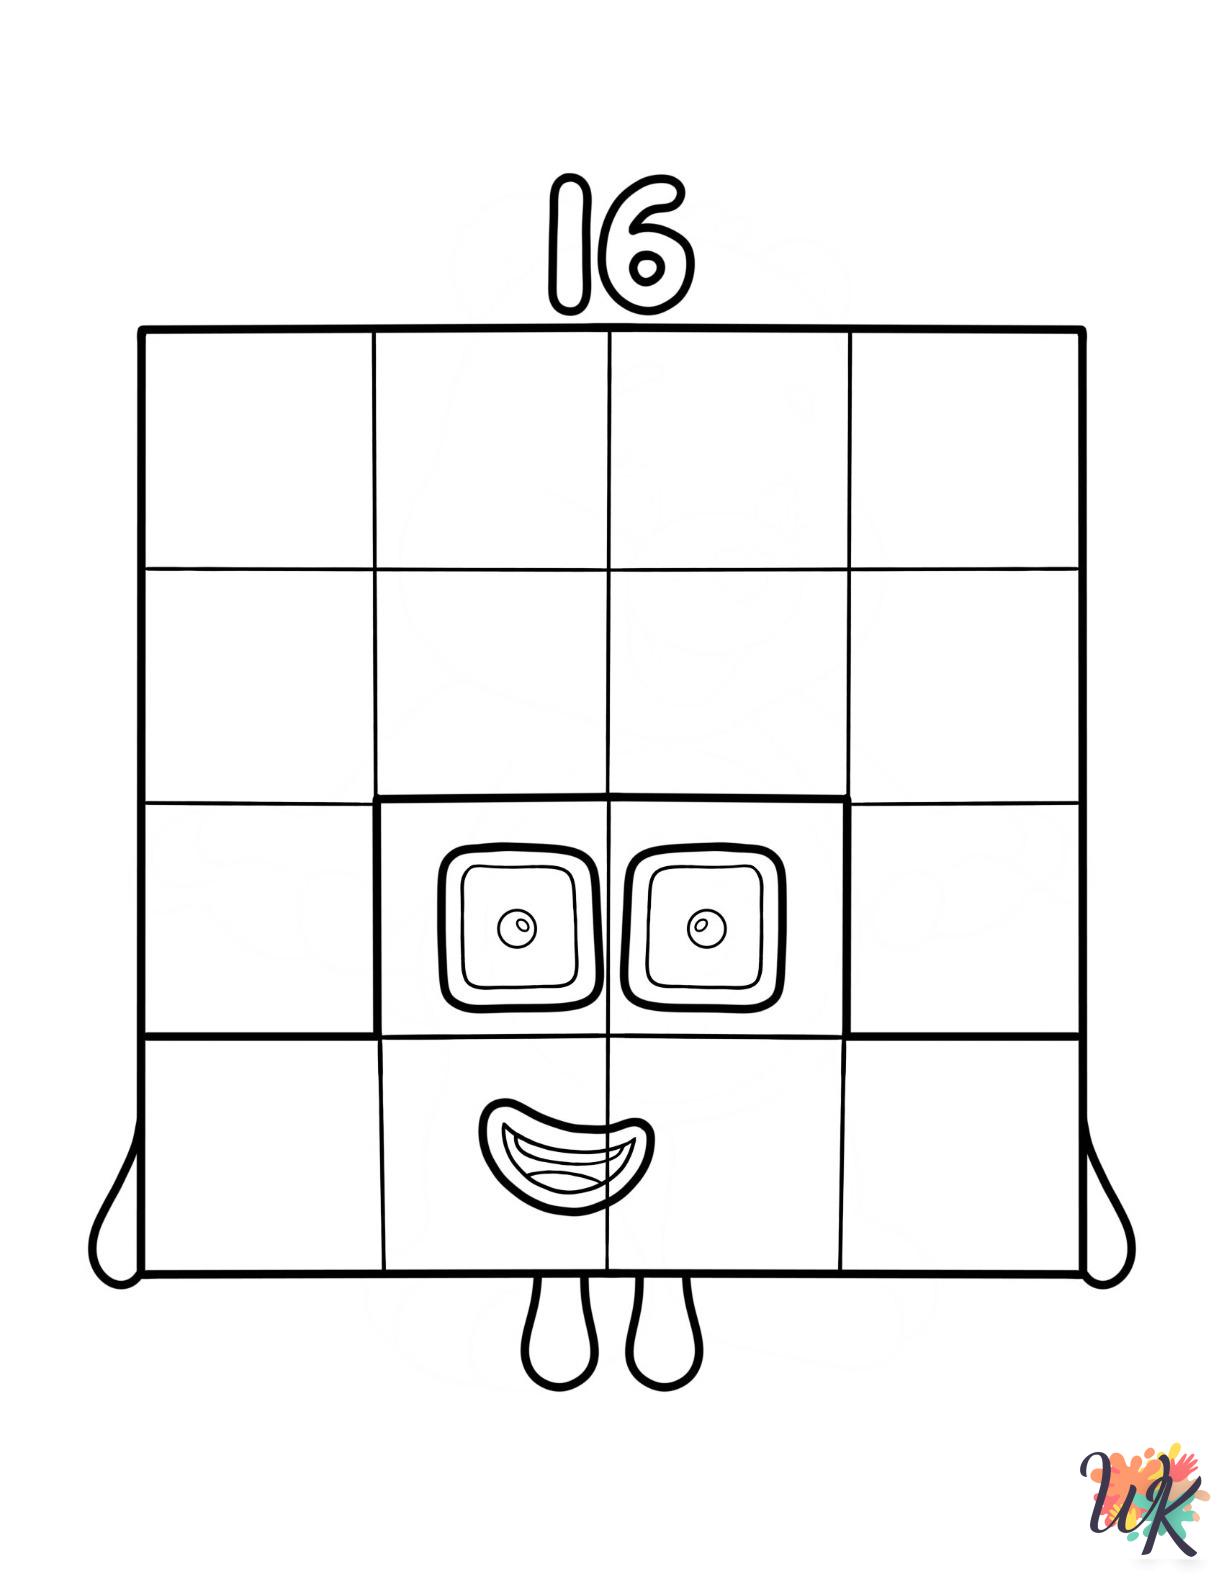 Numberblocks adult coloring pages